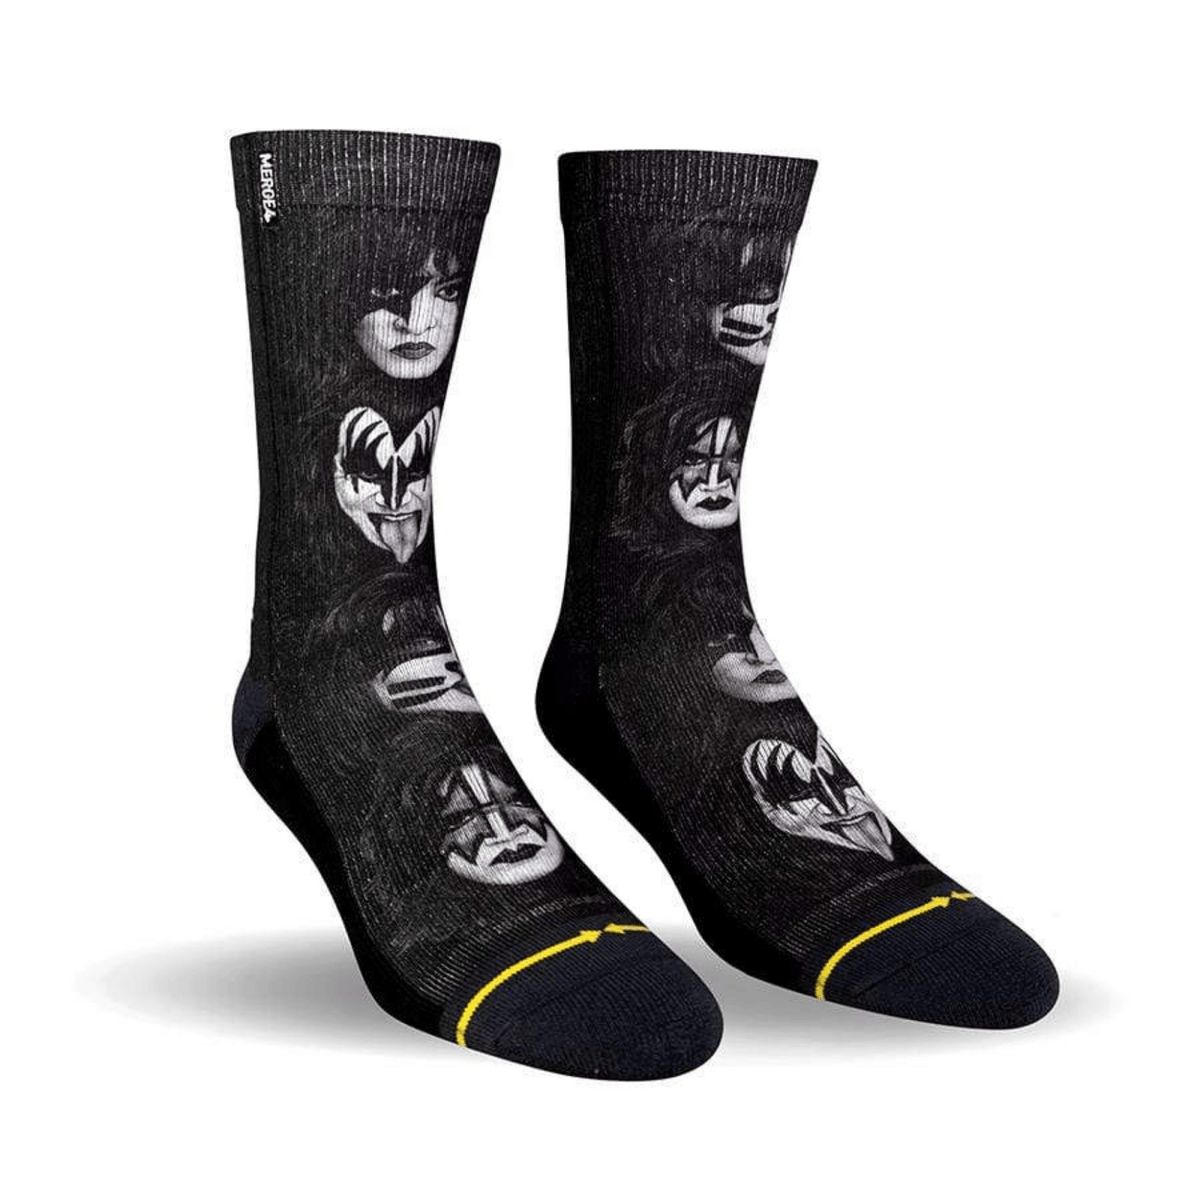 MERGE4 Blondie One Way or Another Crew Socks for Men and Women Super Comfy Iconic Band Compression Merchandise Elastic Arch Support (Large)